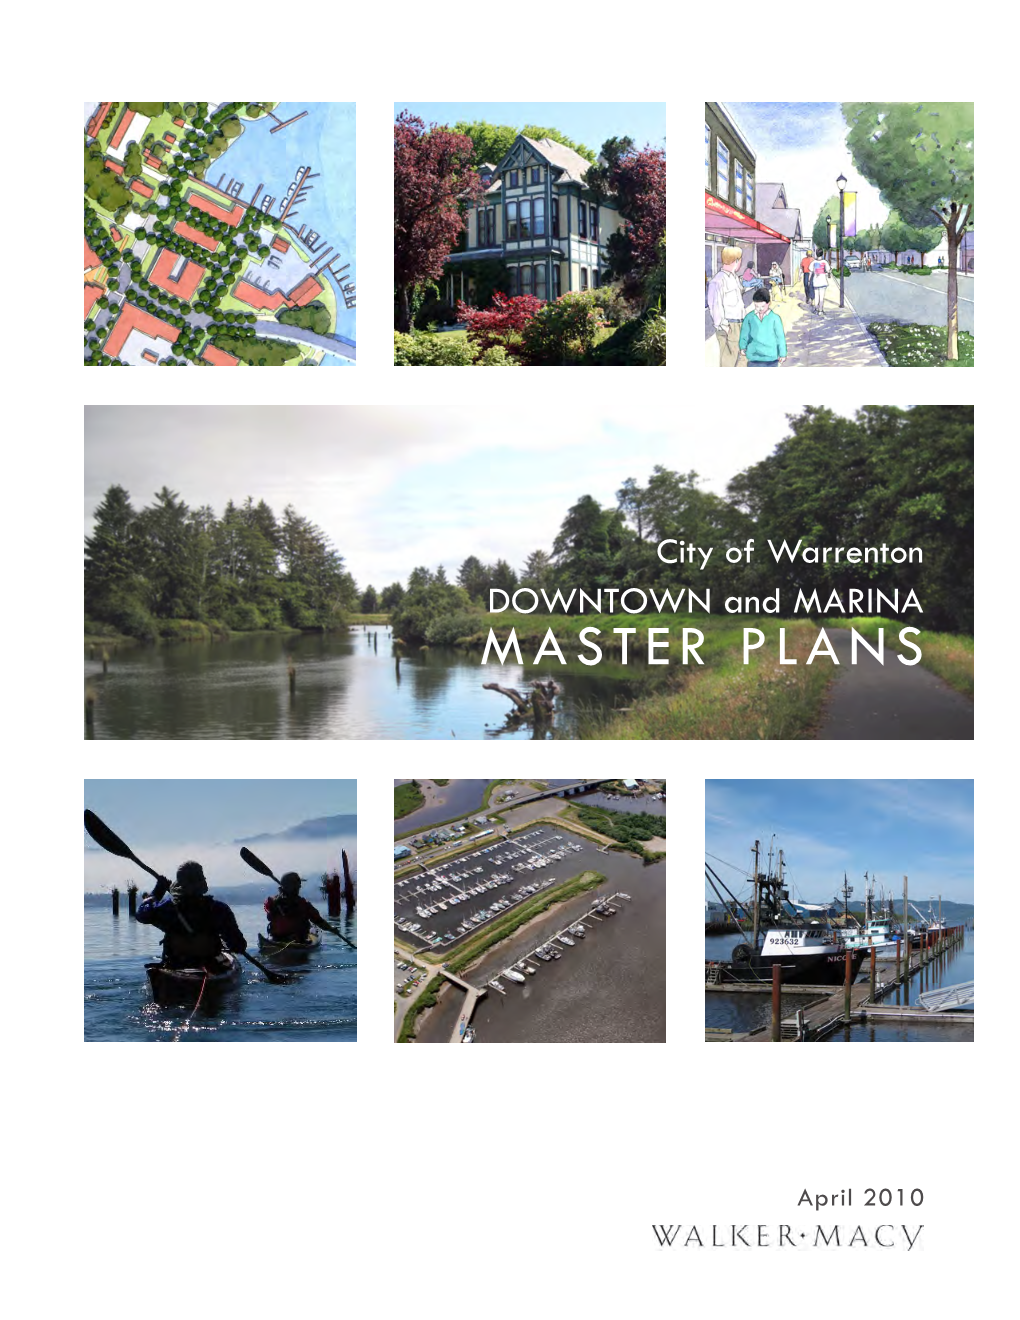 DOWNTOWN and MARINA MASTER PLANS